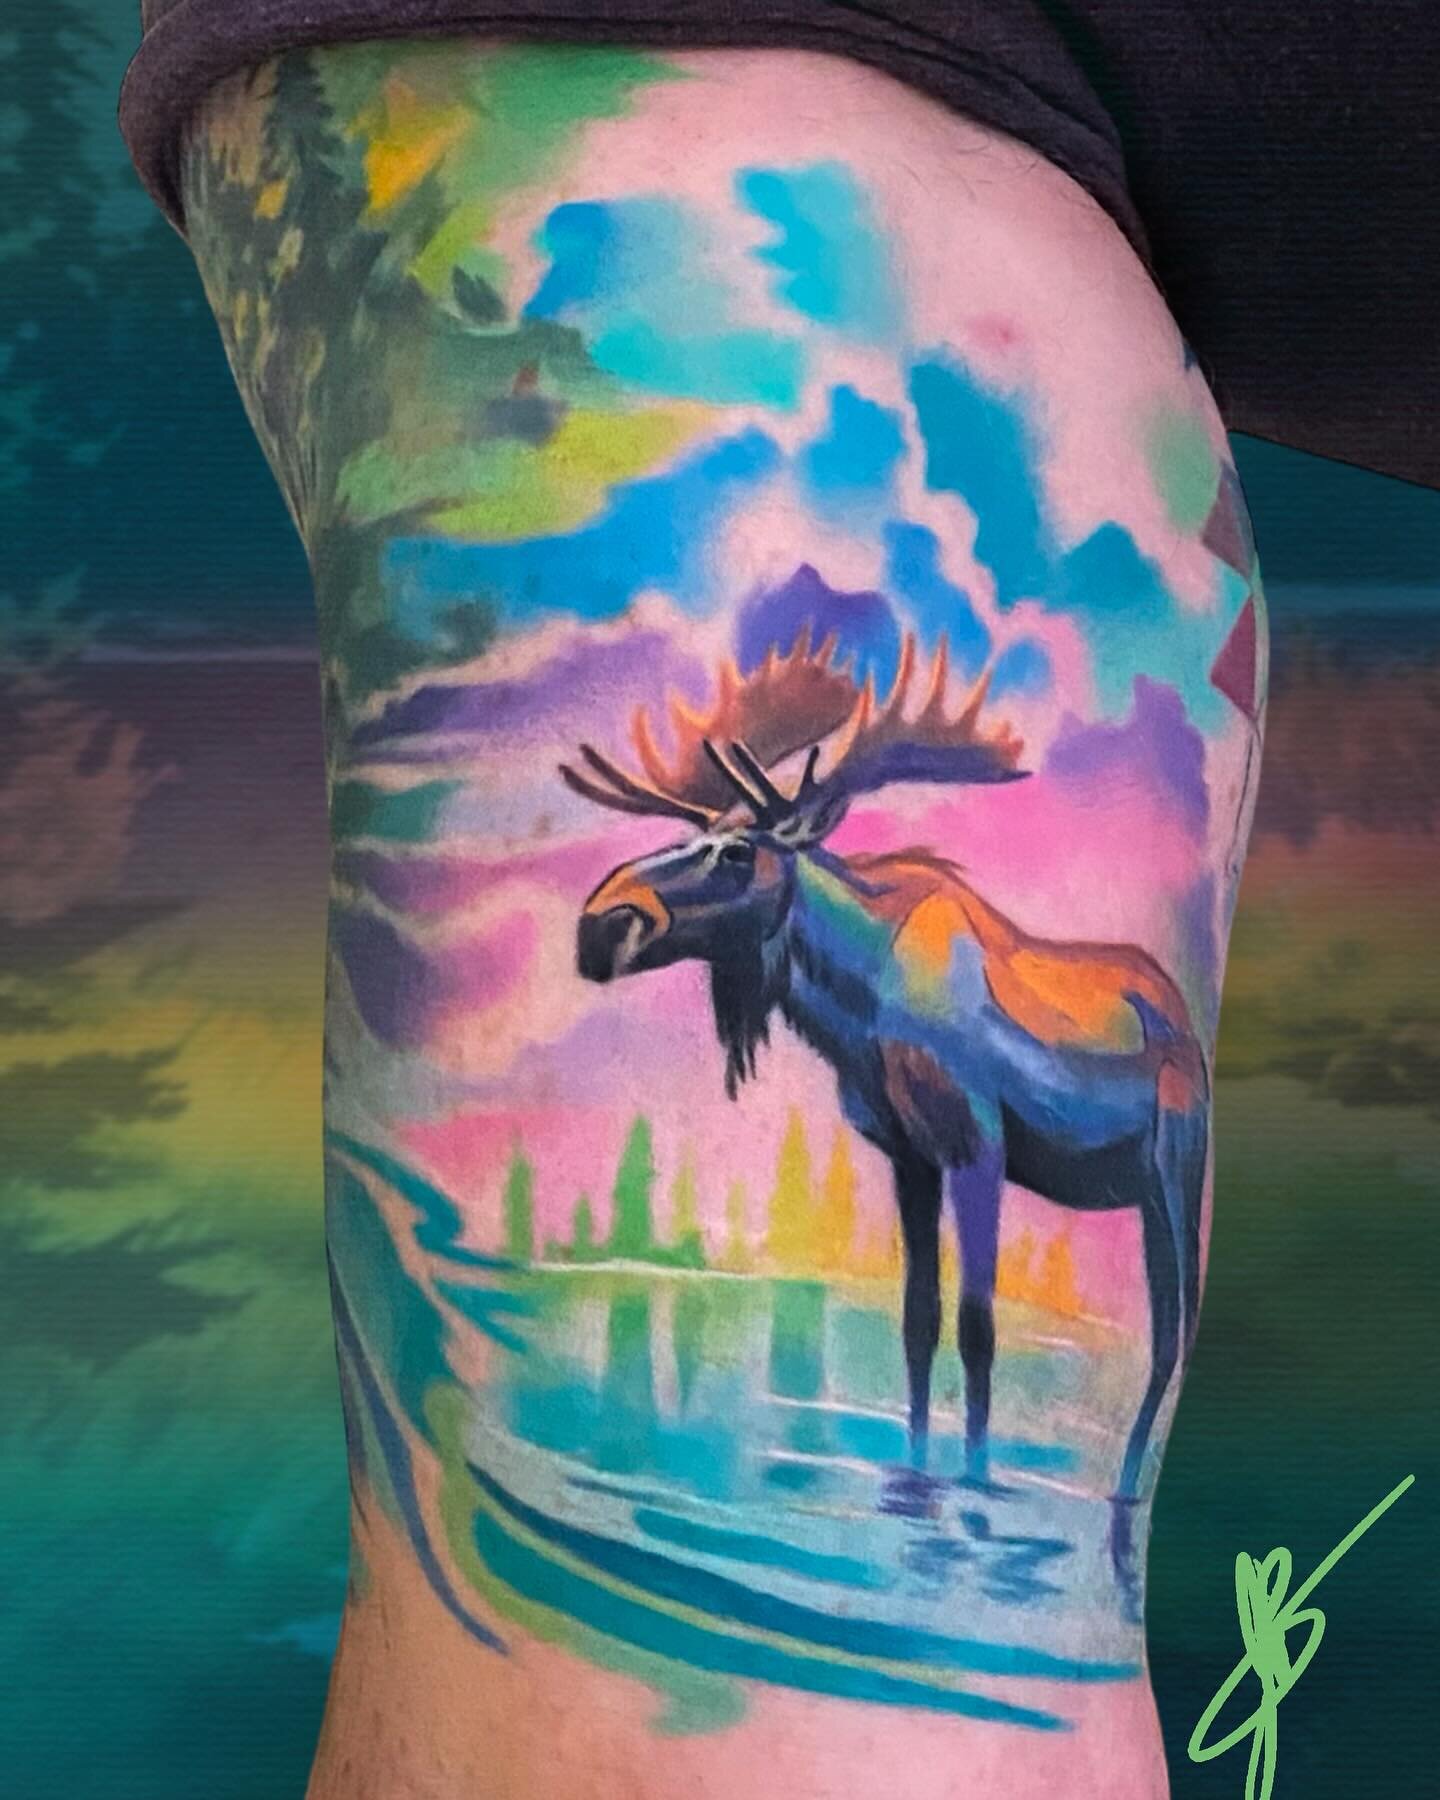 Moose tattoo with a painterly fantasy background. This color palette gives me happy tranquil vibes. #moose #nature #naturetattoo #animaltattoo #tattoo #ink #inked #art #artist